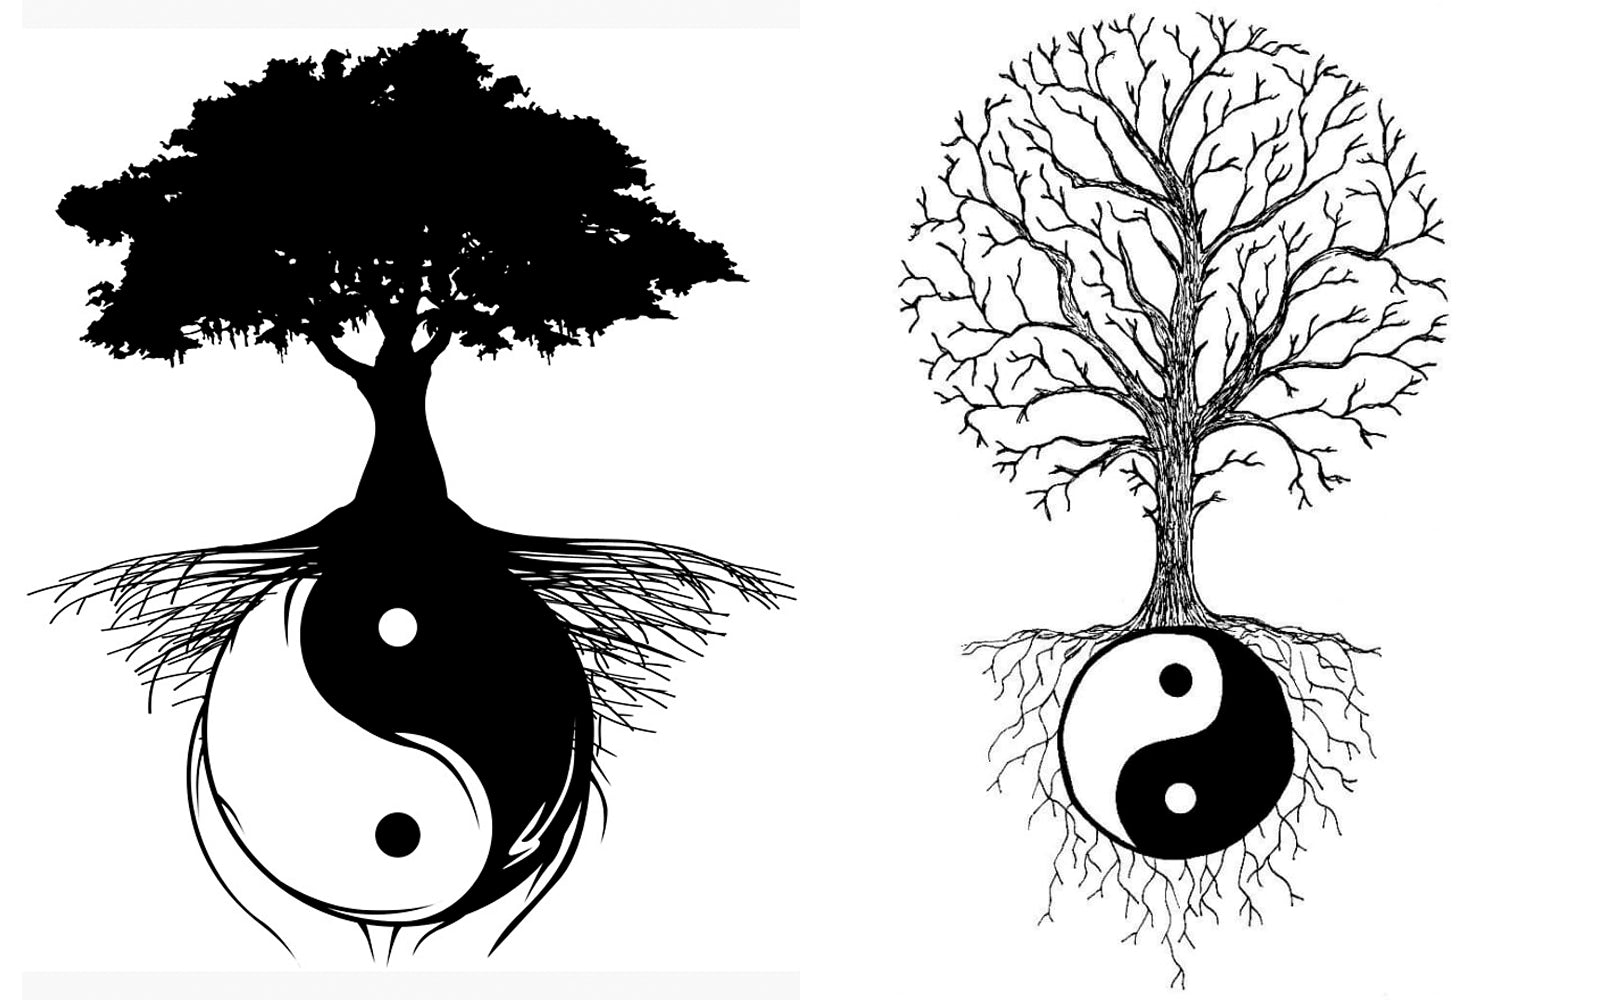 What Is the Meaning of Yin and Yang?